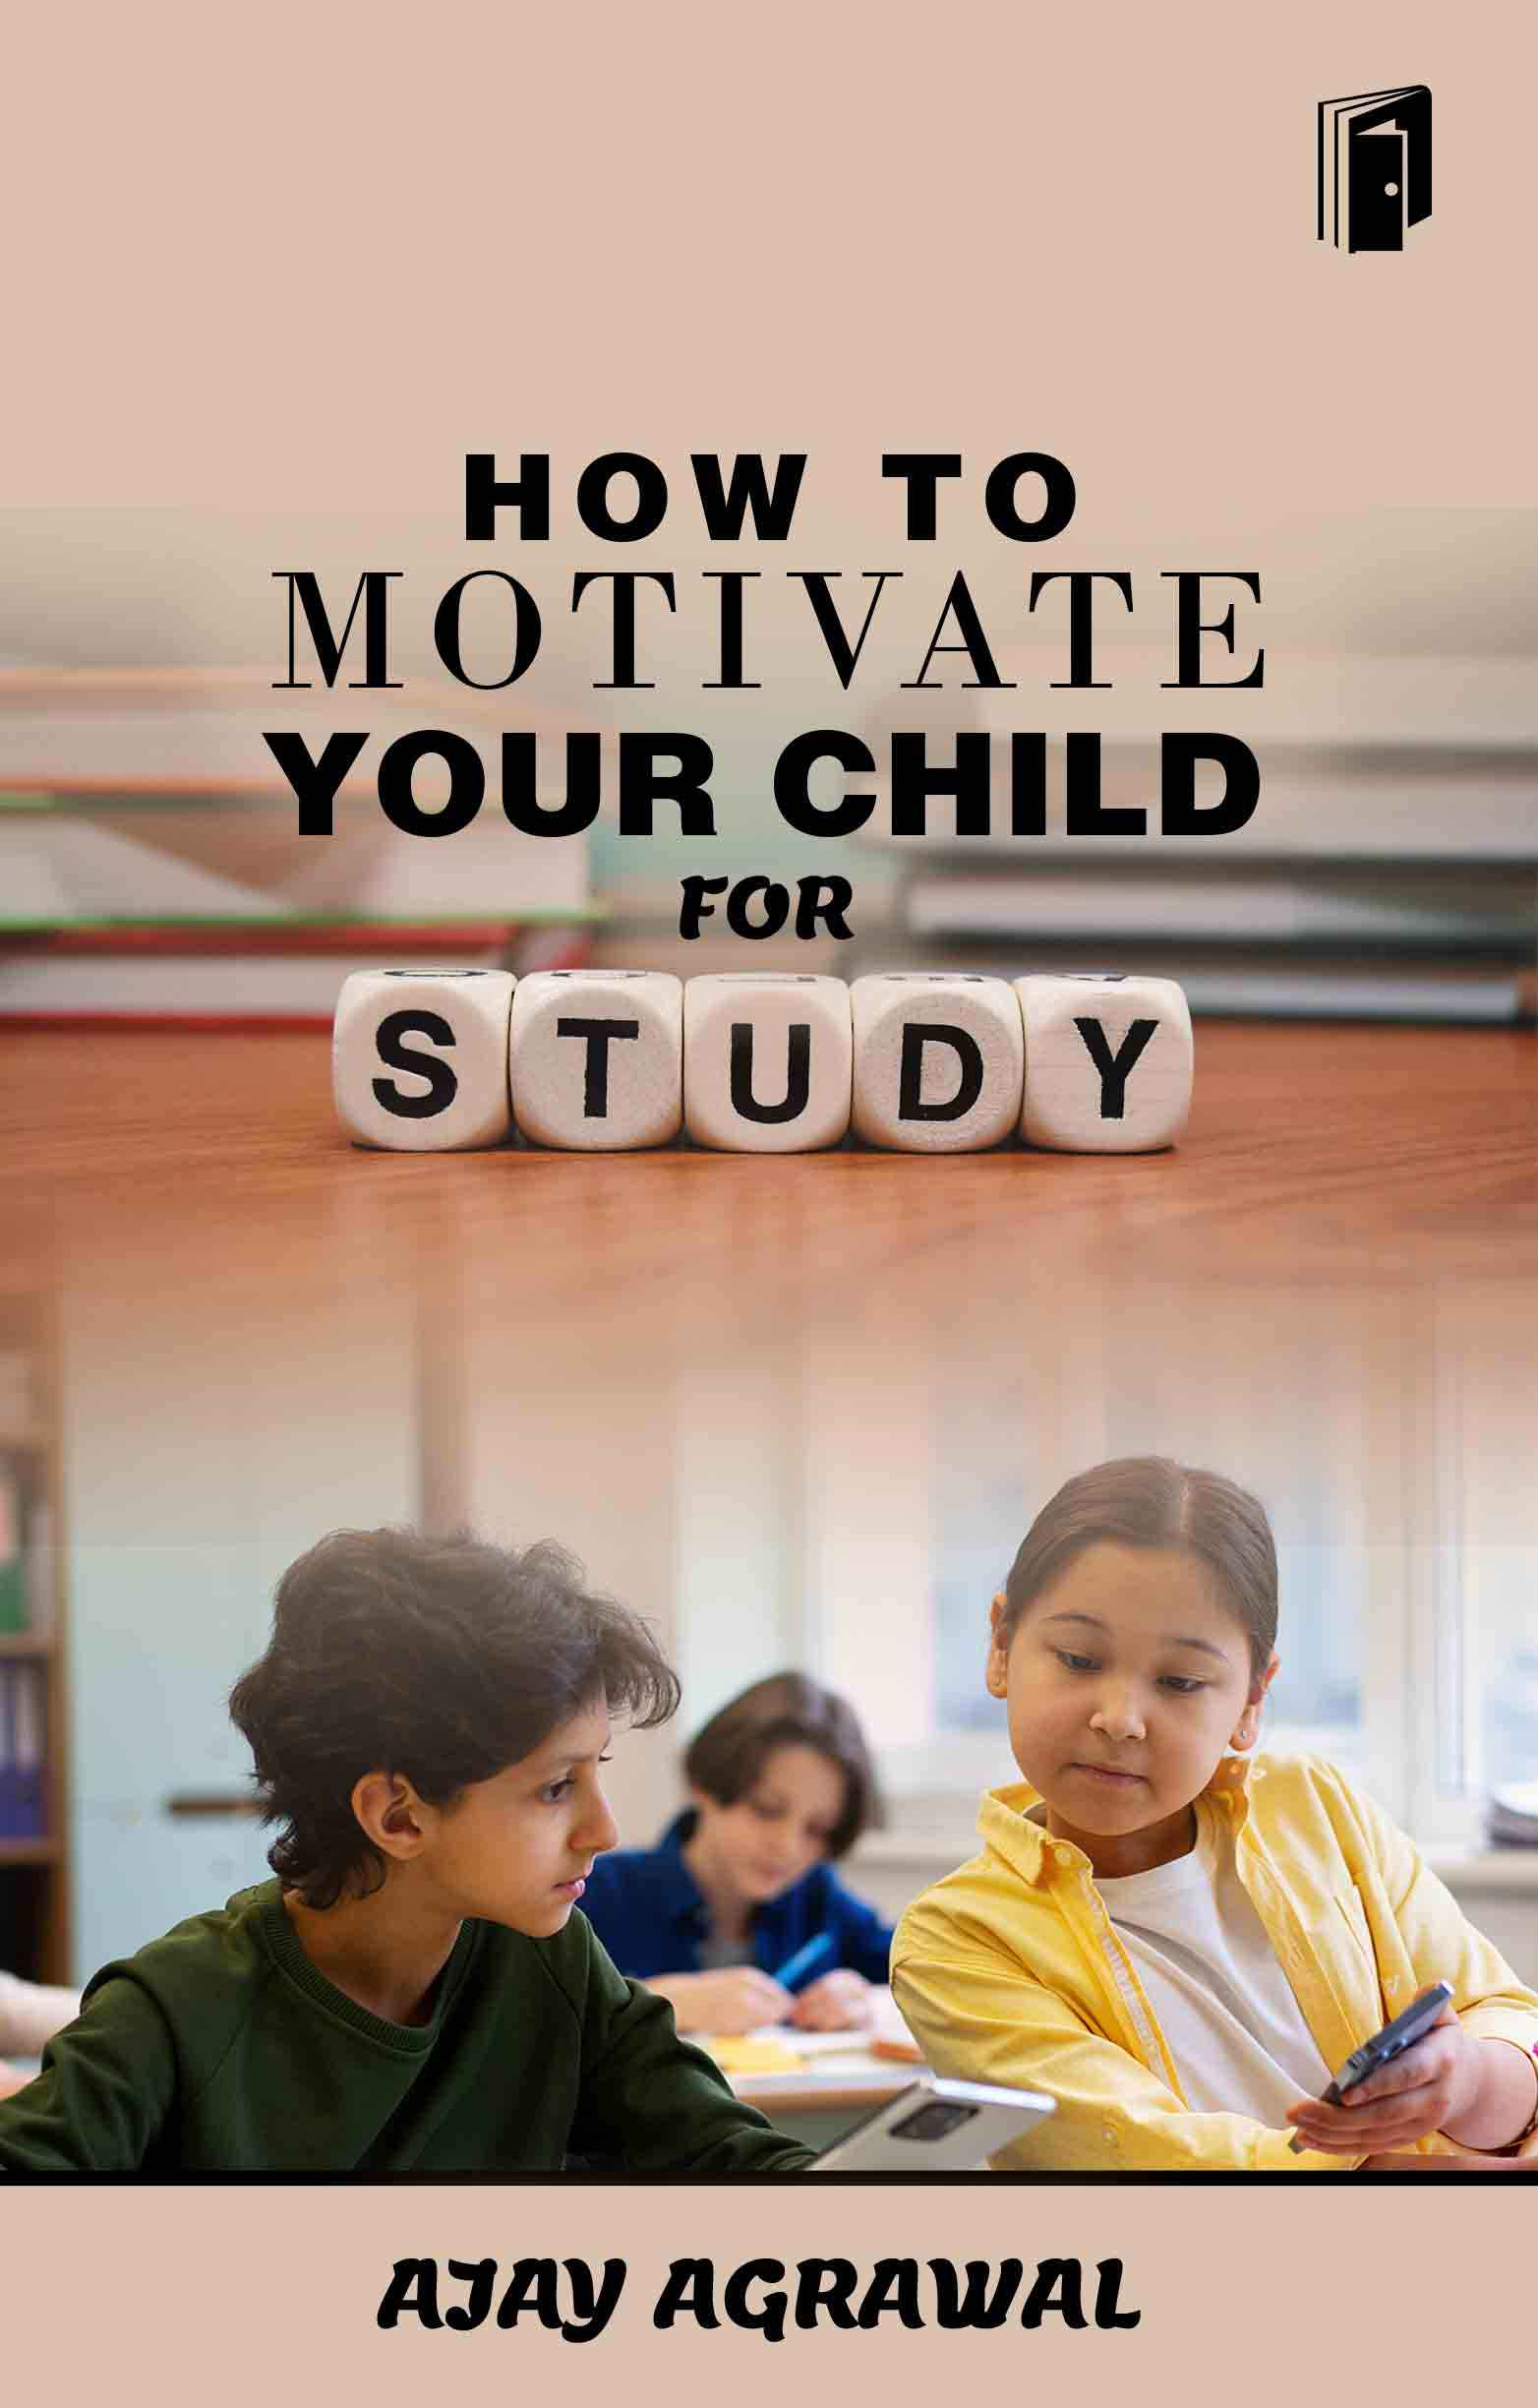 How to motivate your child for study